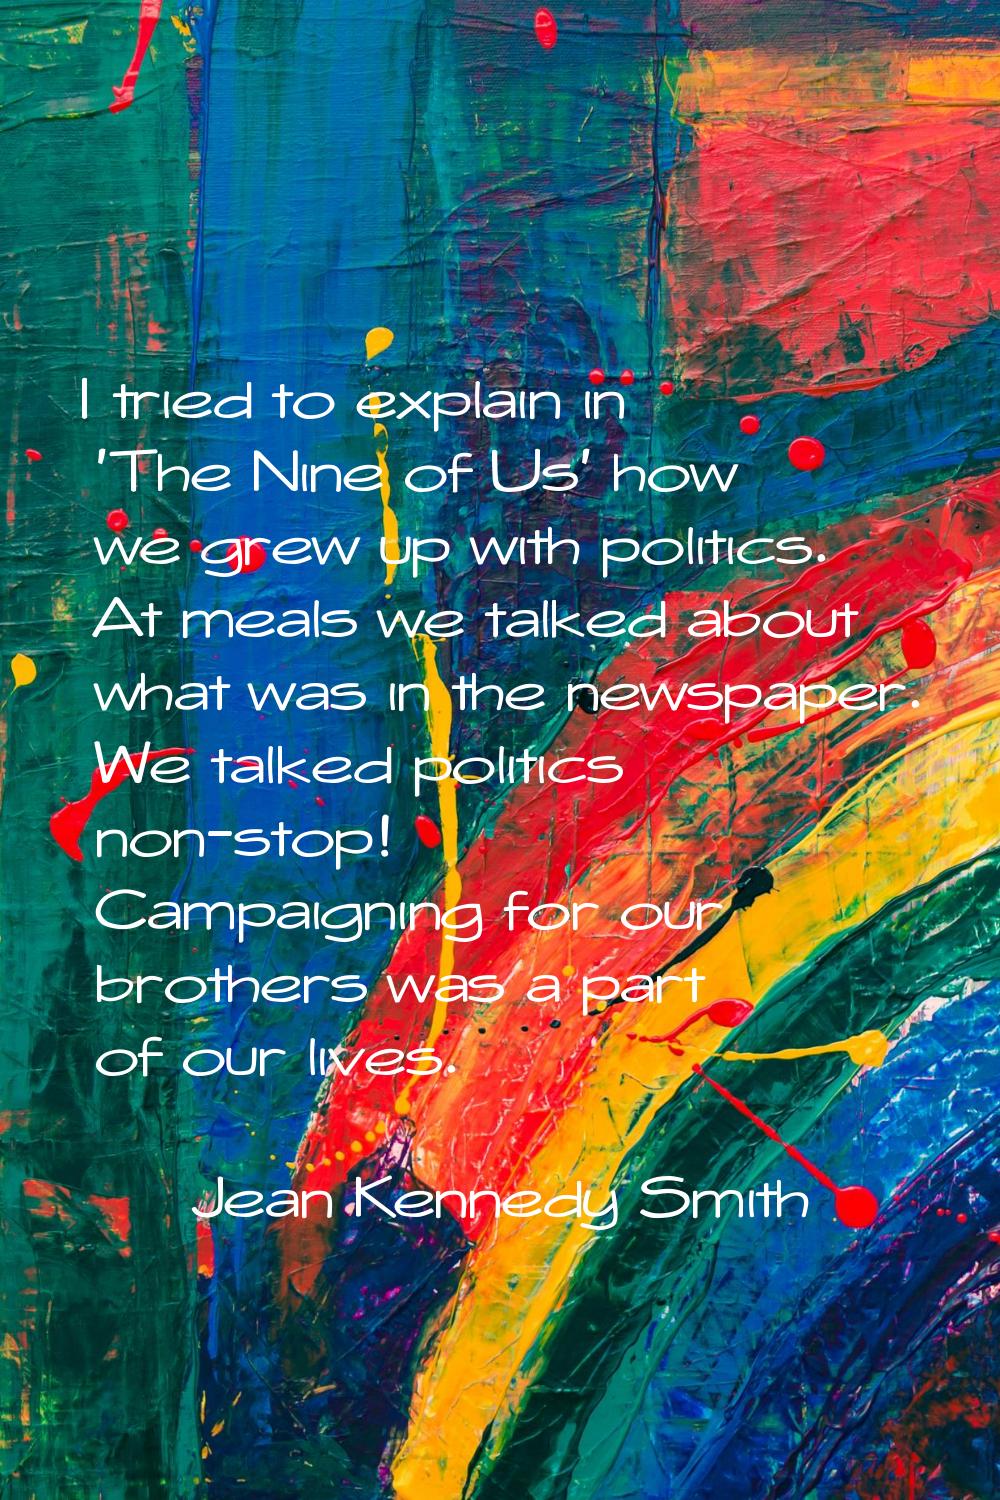 I tried to explain in 'The Nine of Us' how we grew up with politics. At meals we talked about what 